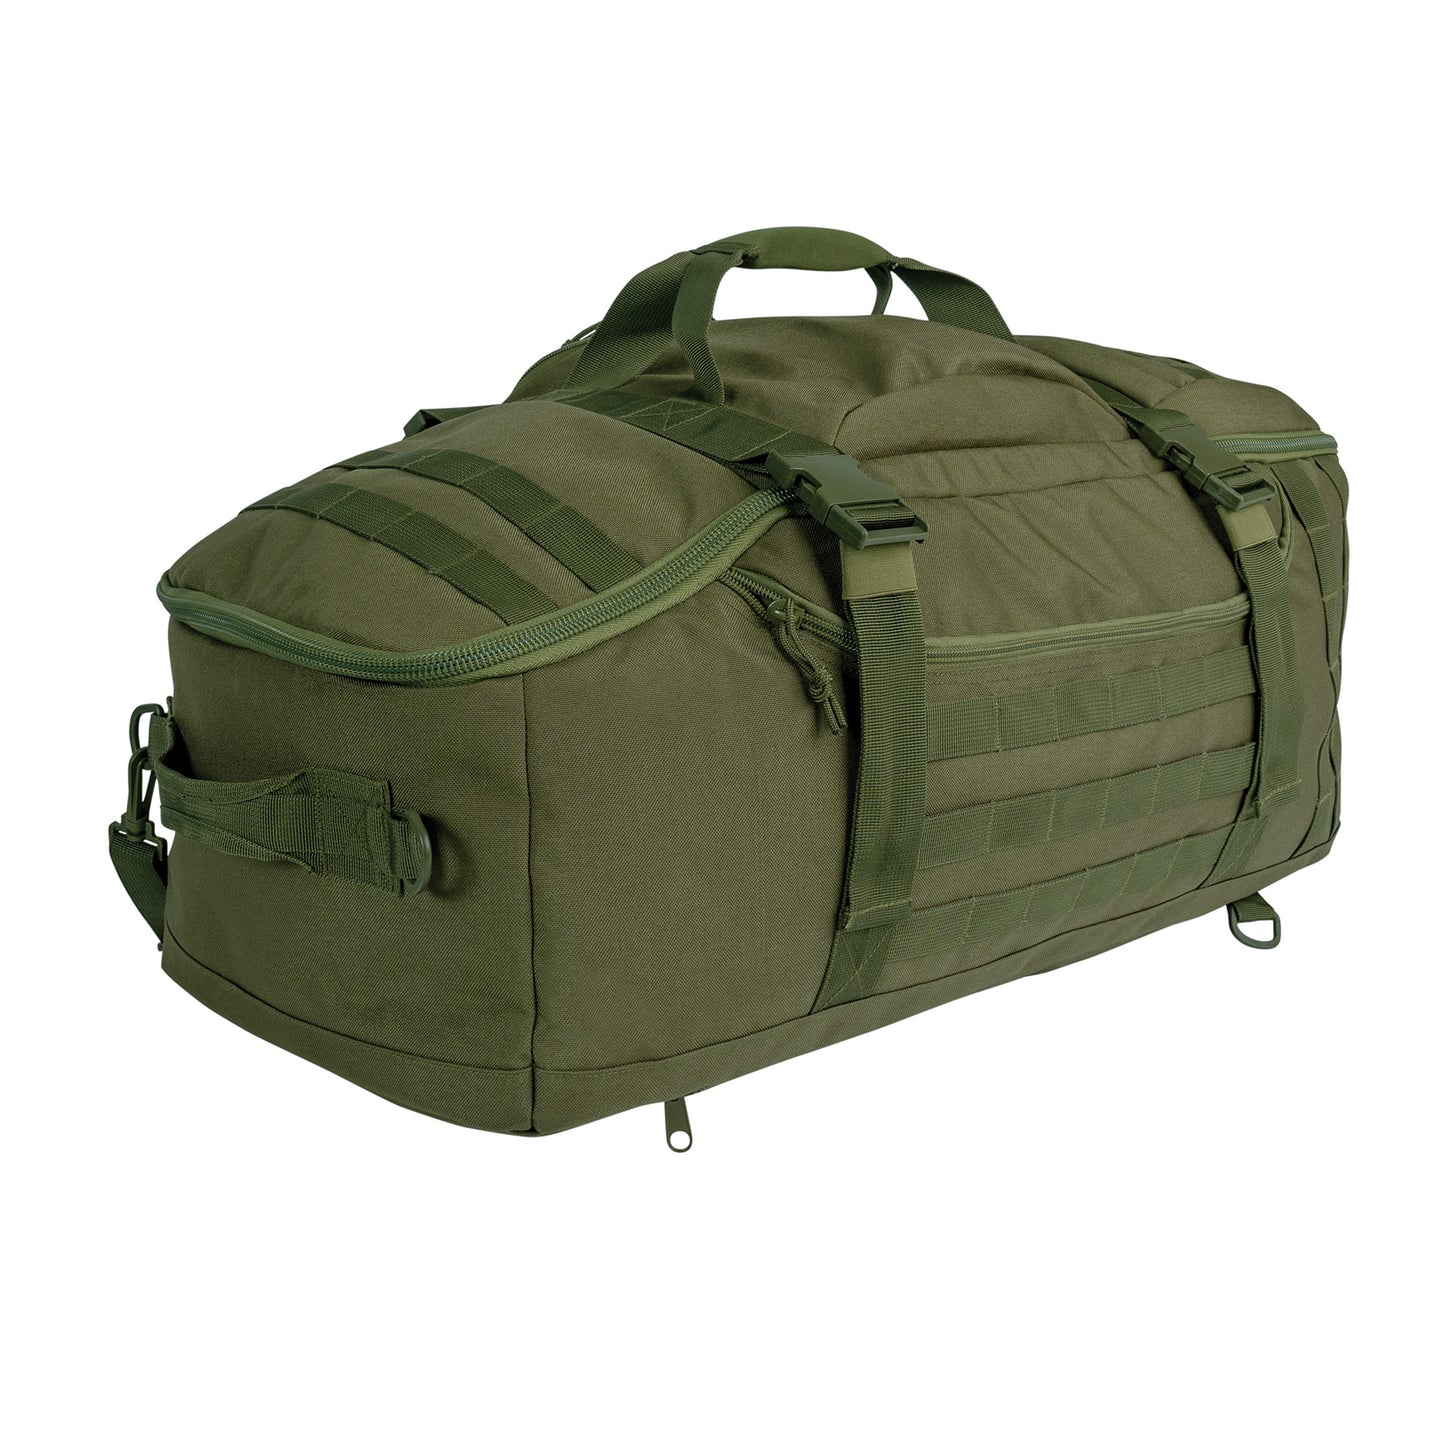 Rothco 3 In 1 Convertible Mission Bag